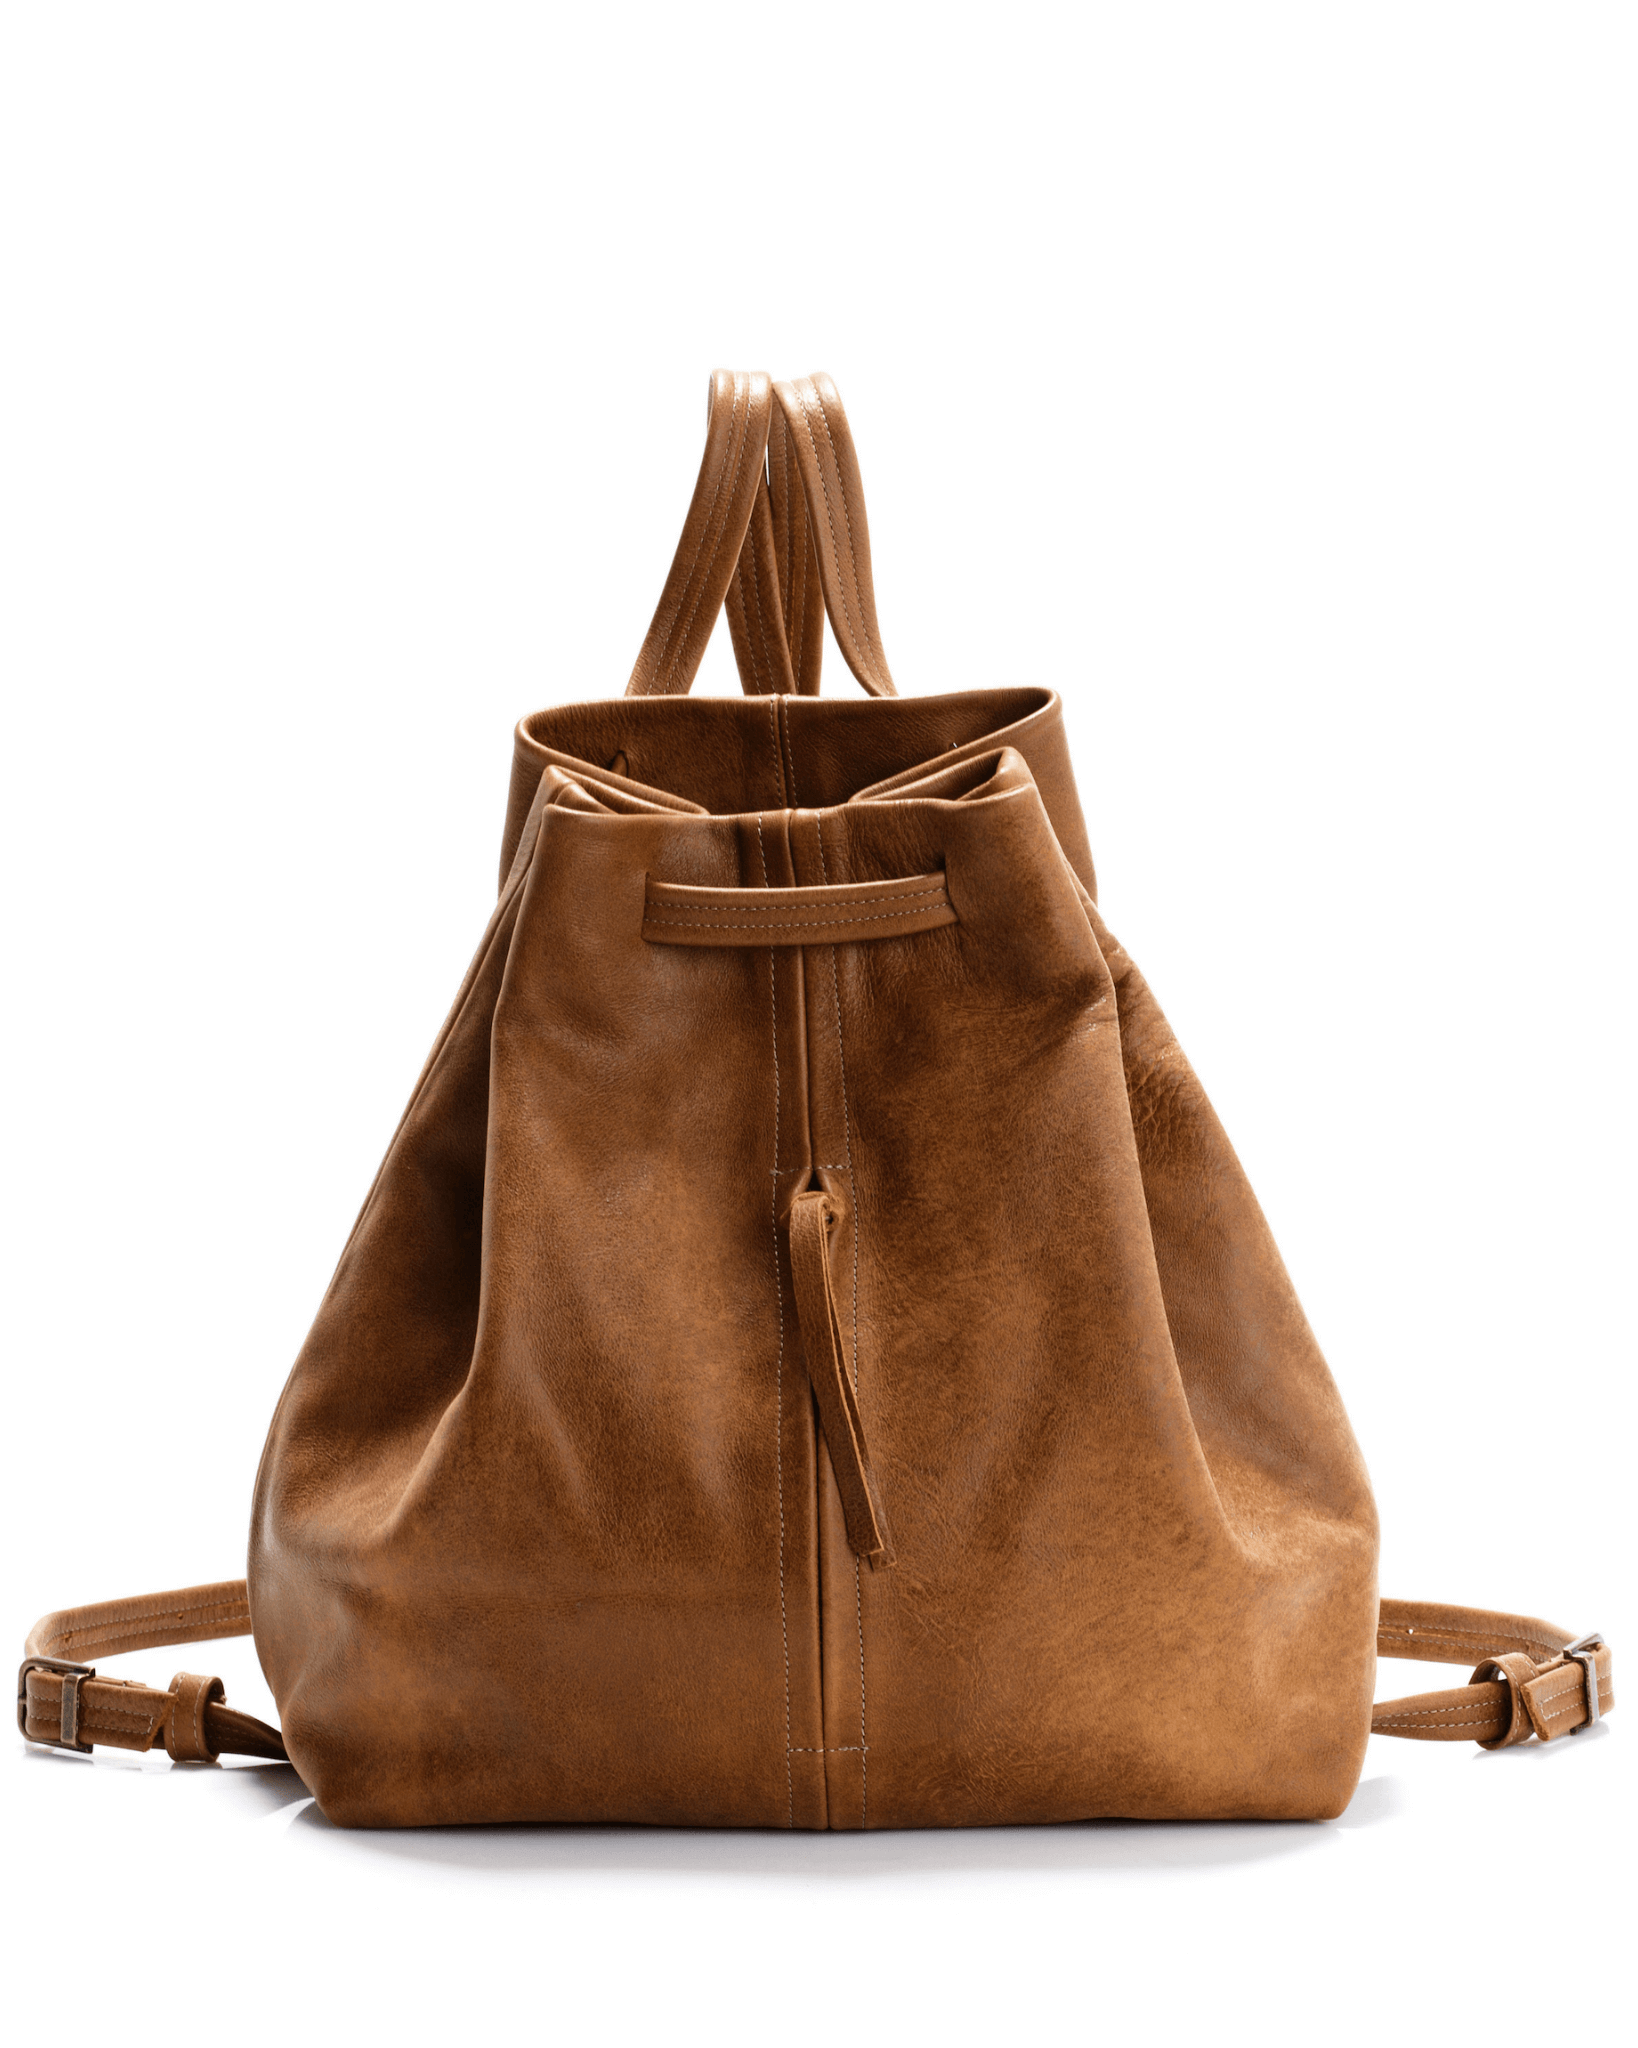 SOFT LEATHER Women's Drawstring Backpack